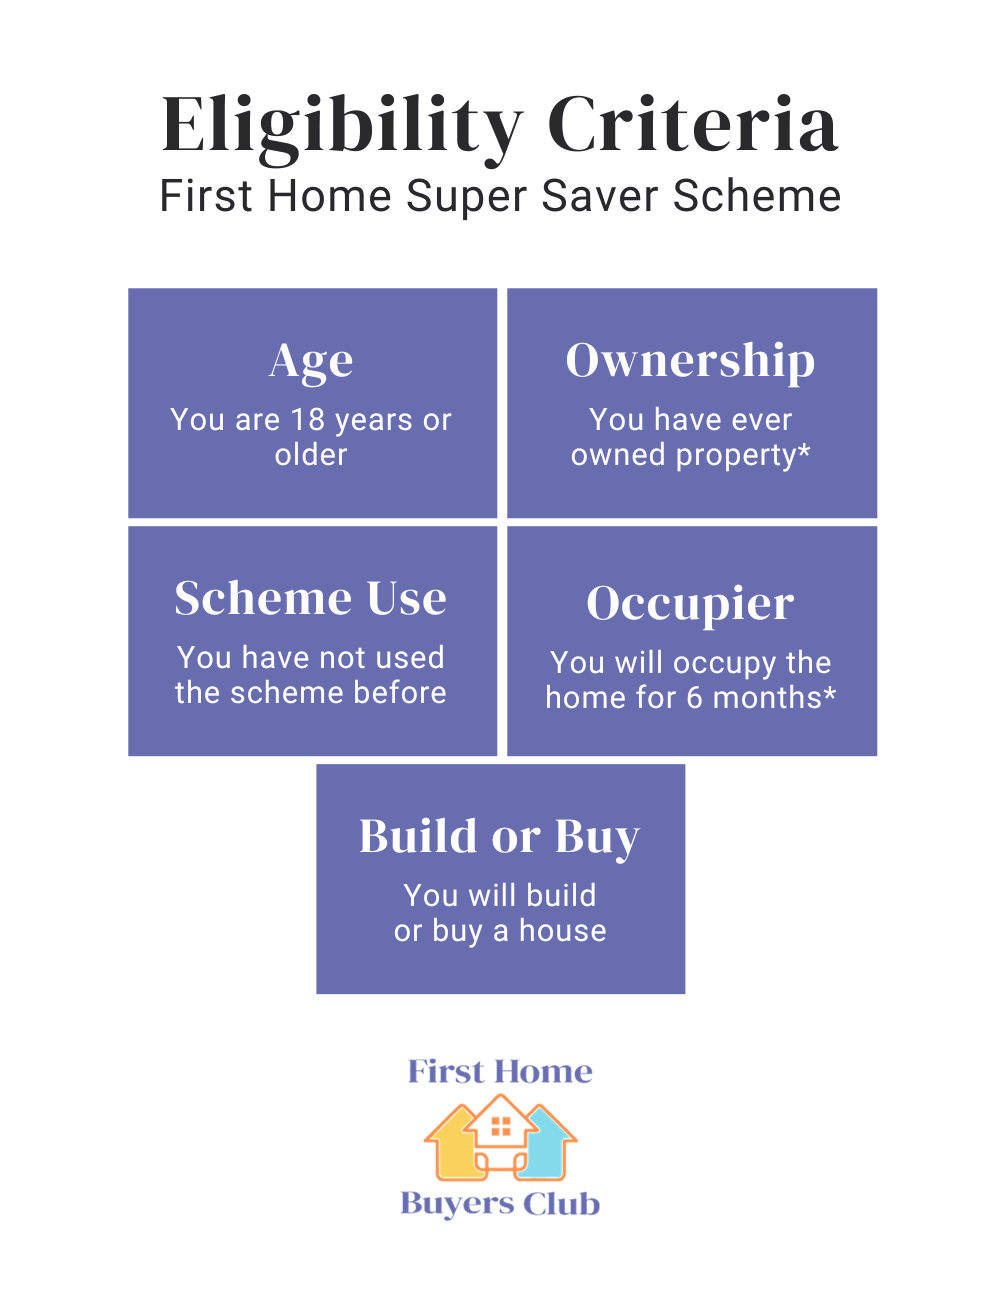 Chart showing the first home super saver scheme eligibility criteria